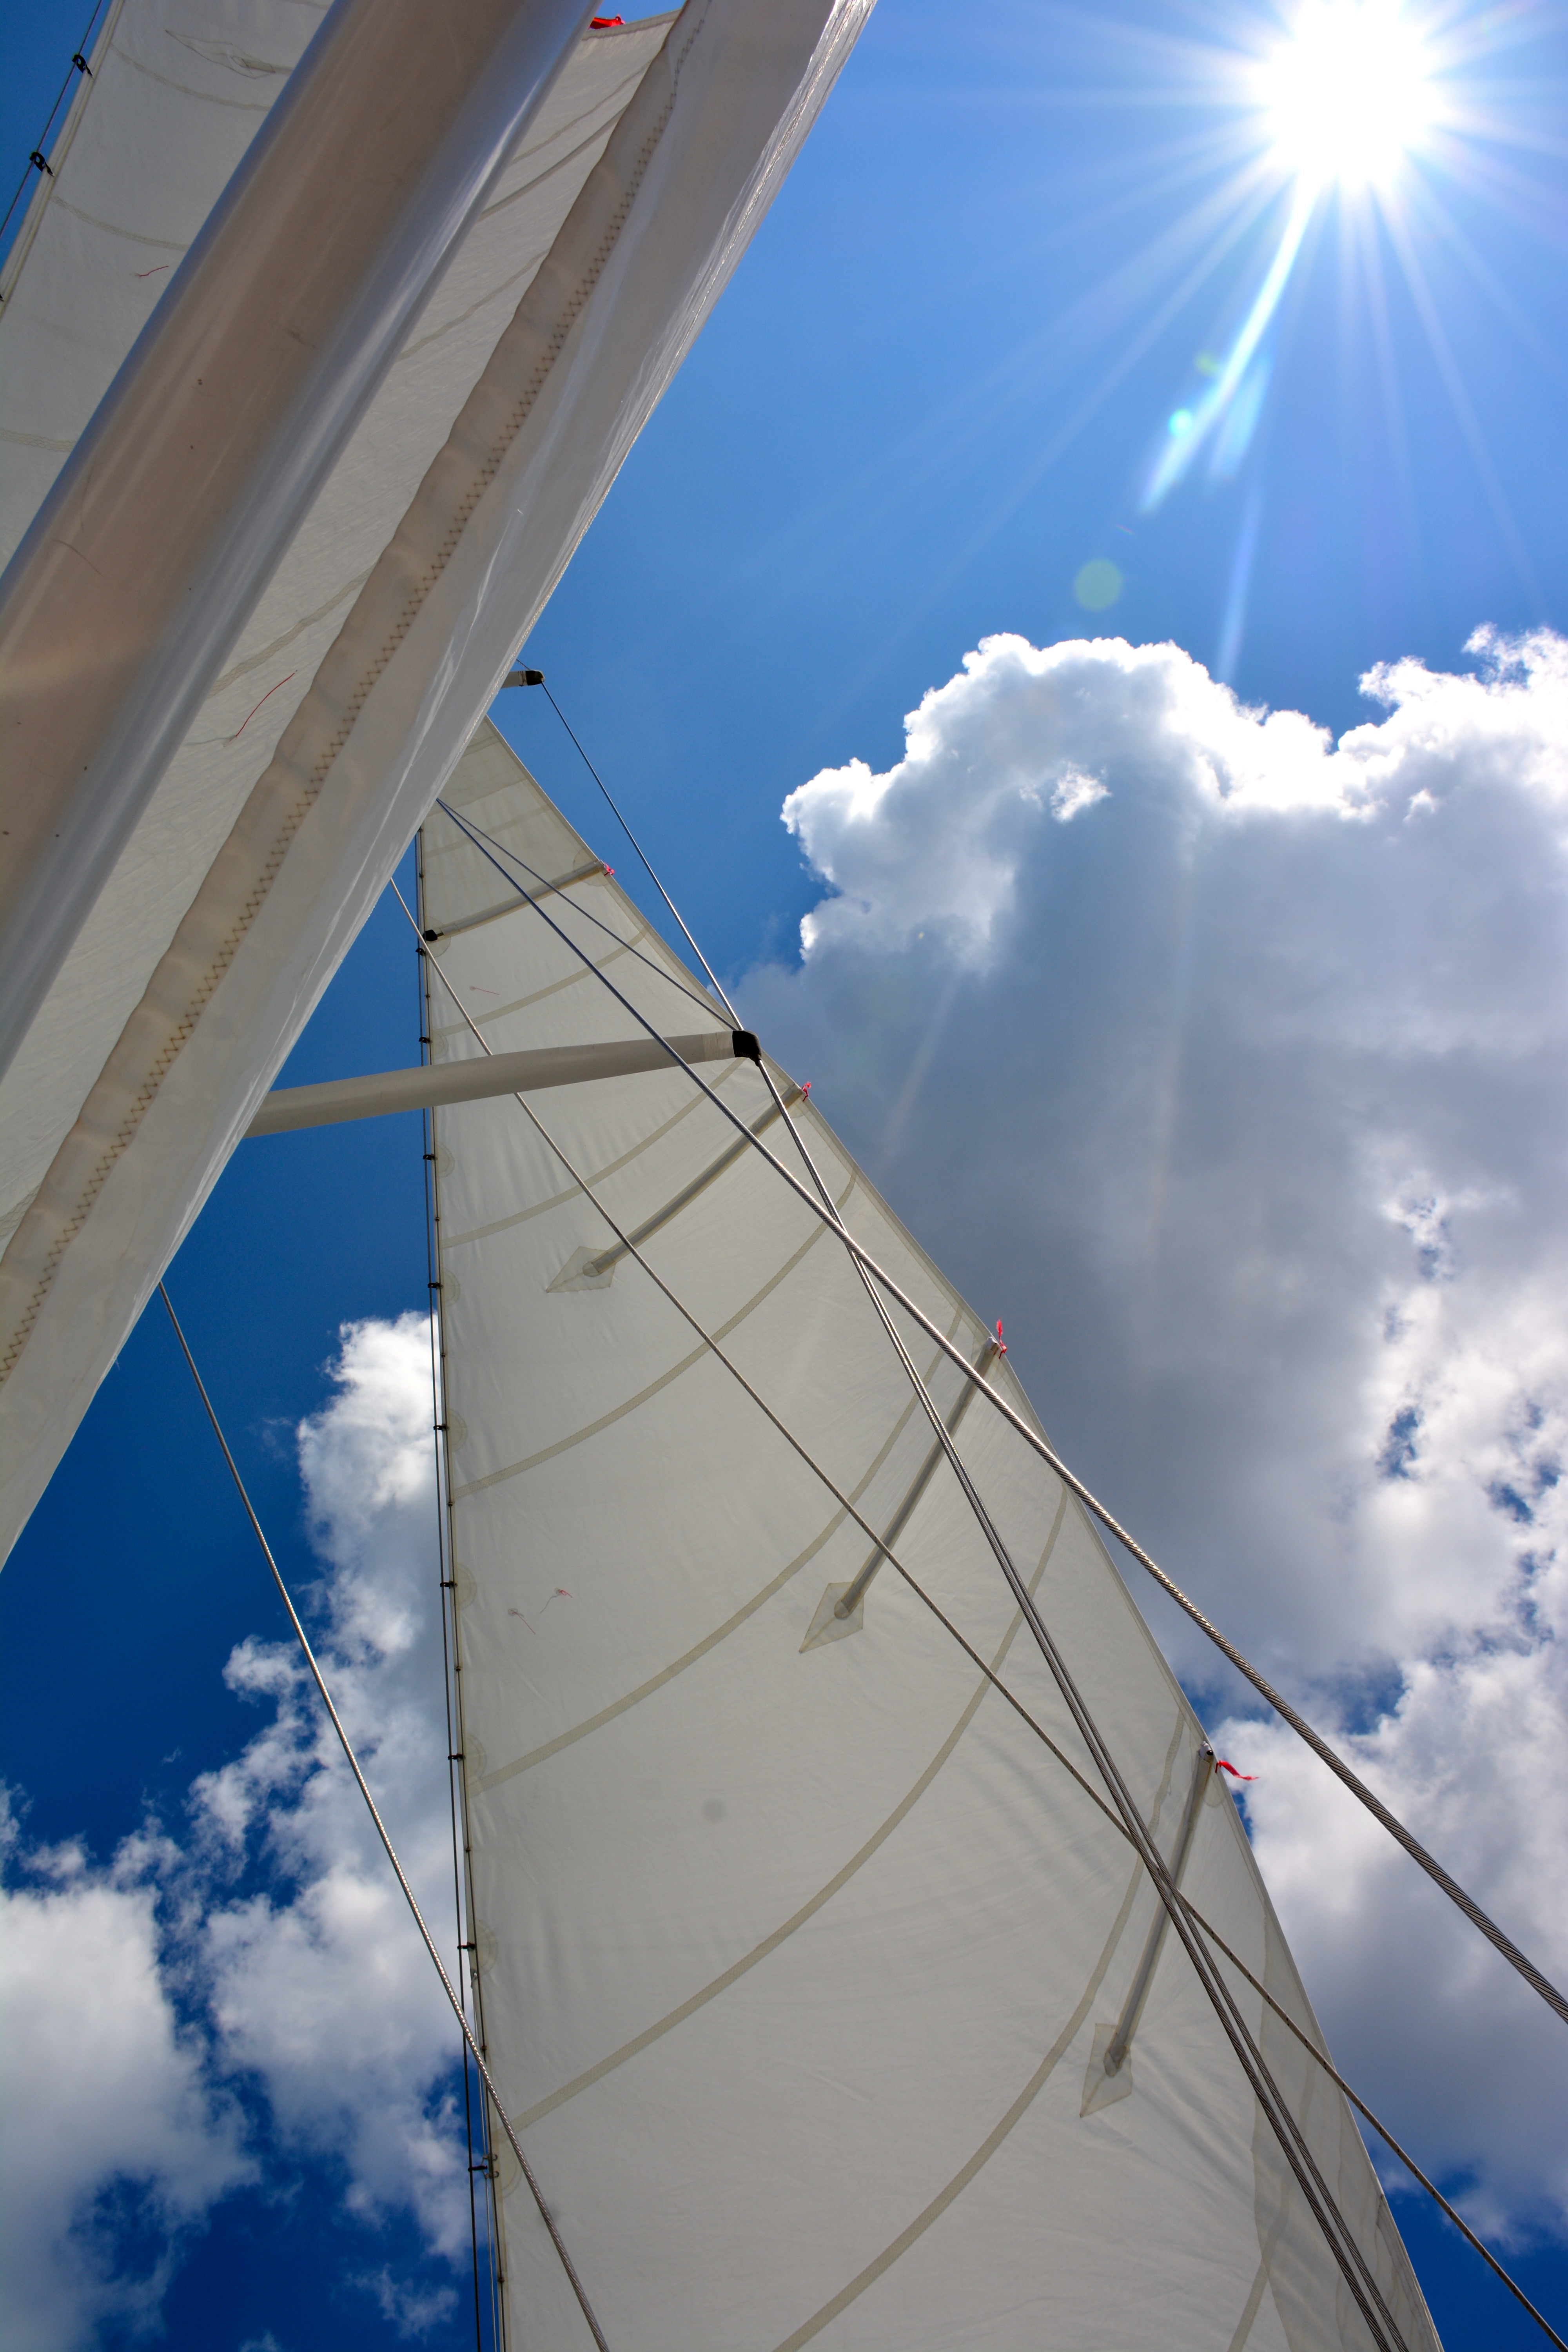 Sails, white clouds and blue skies